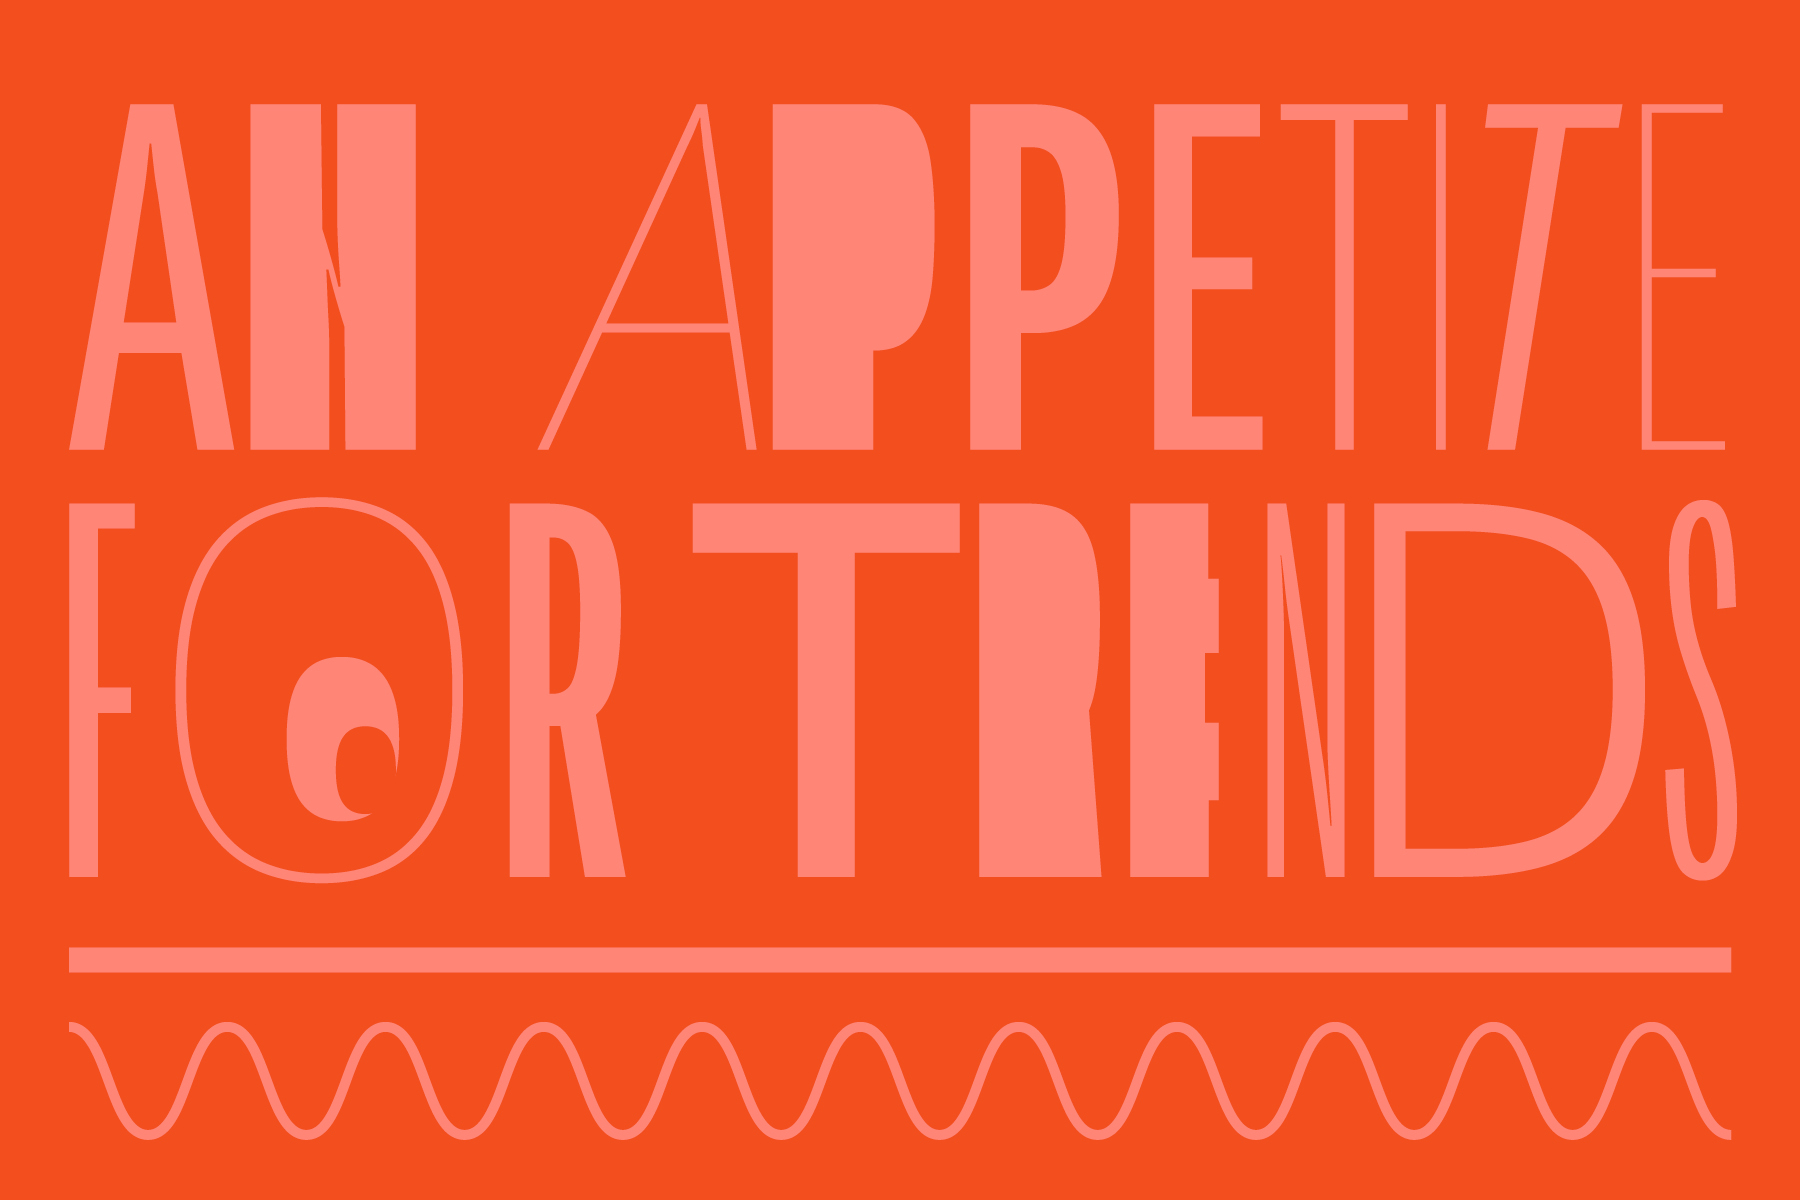 Headline for the article 'An appetite for trends' in an illustrative style with quirky typography